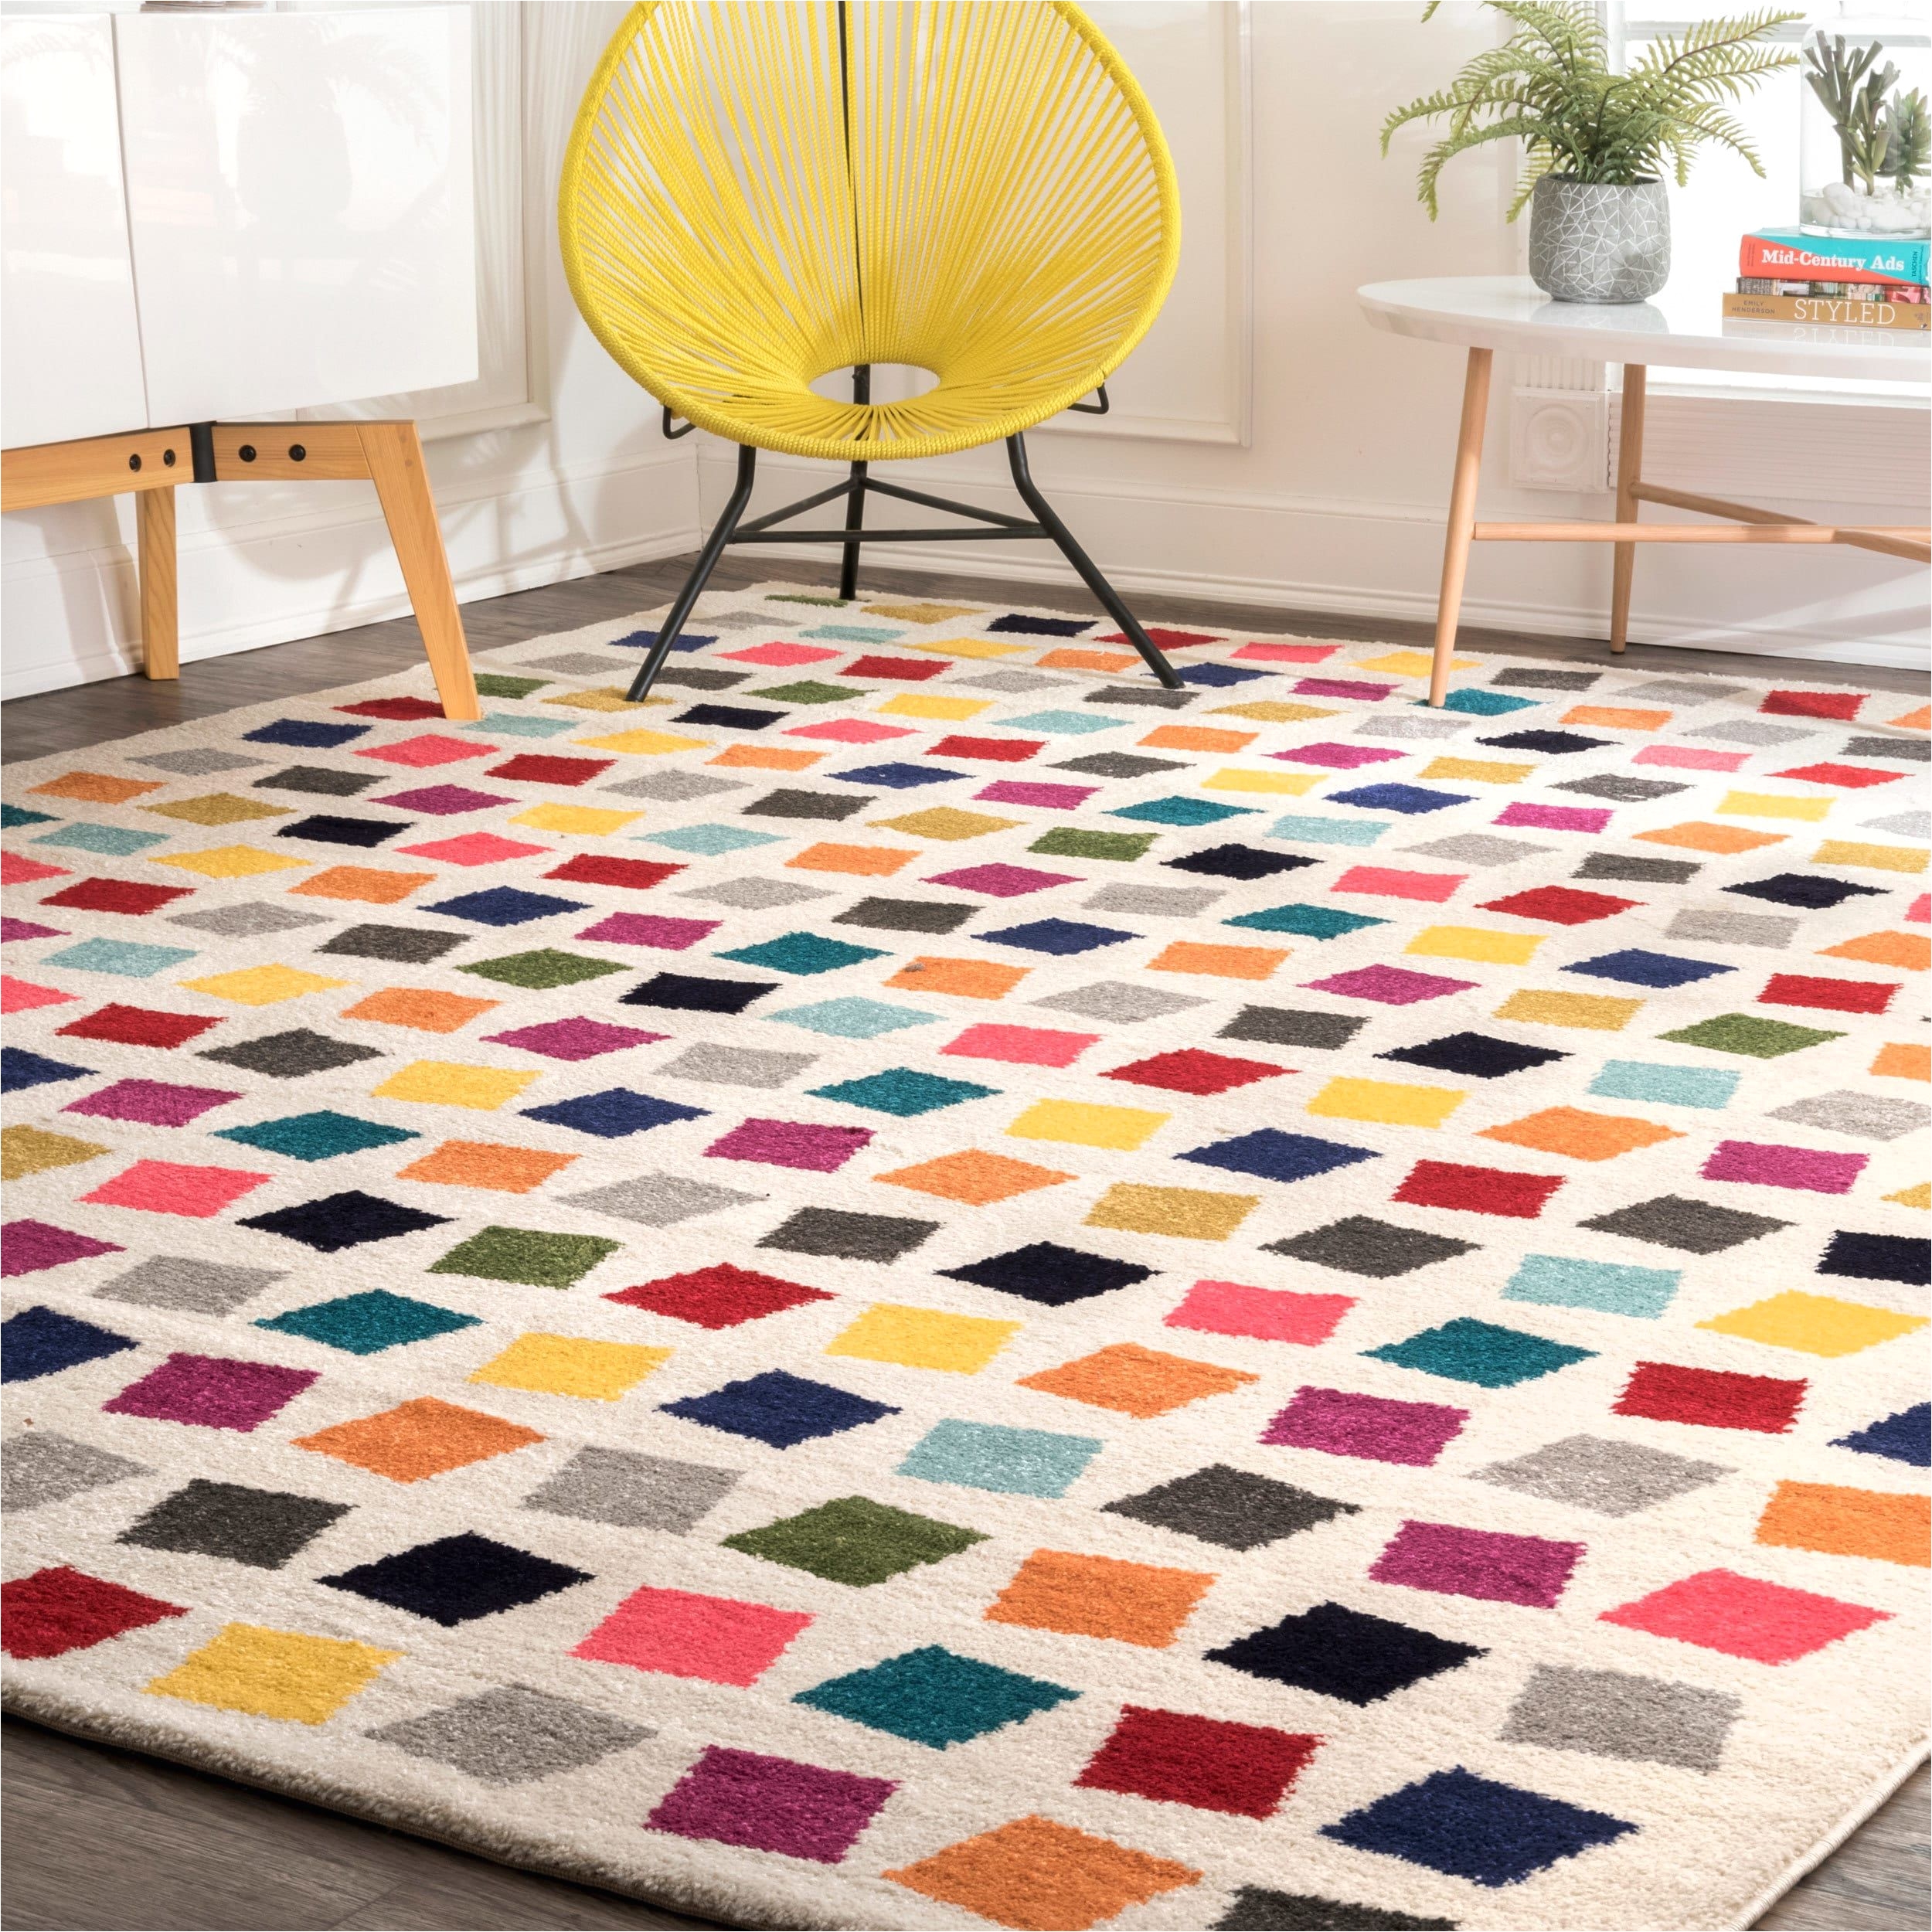 nuloom contemporary southwestern bohemian abstract square dots cream yellow pink area rug 8 x 10 multi size 8 x 10